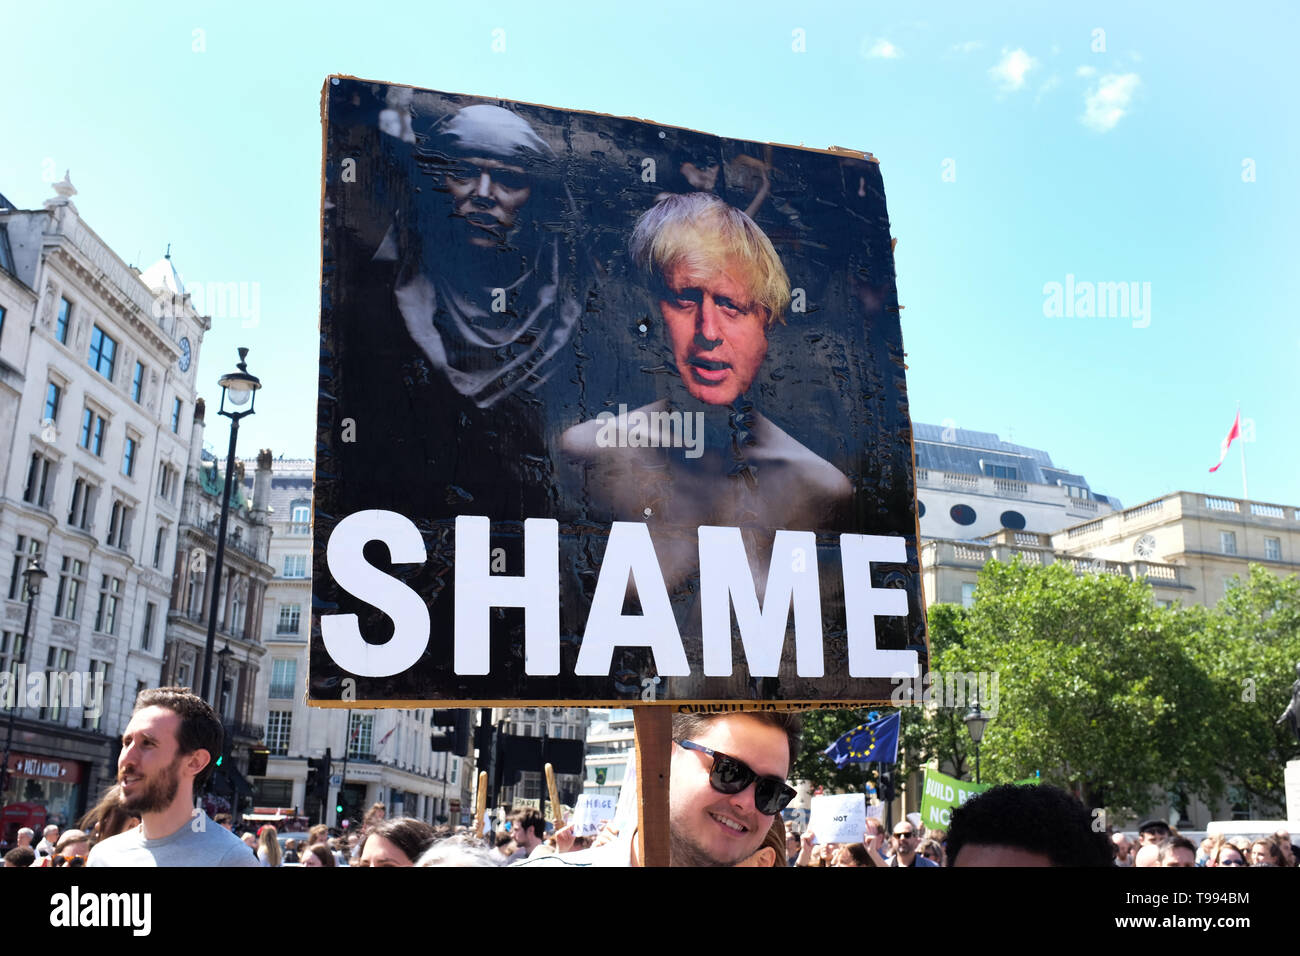 A sign at a rally in London showing British politician Boris Johnson. The anti-Brexit march took place on 2nd July, 2016. Stock Photo